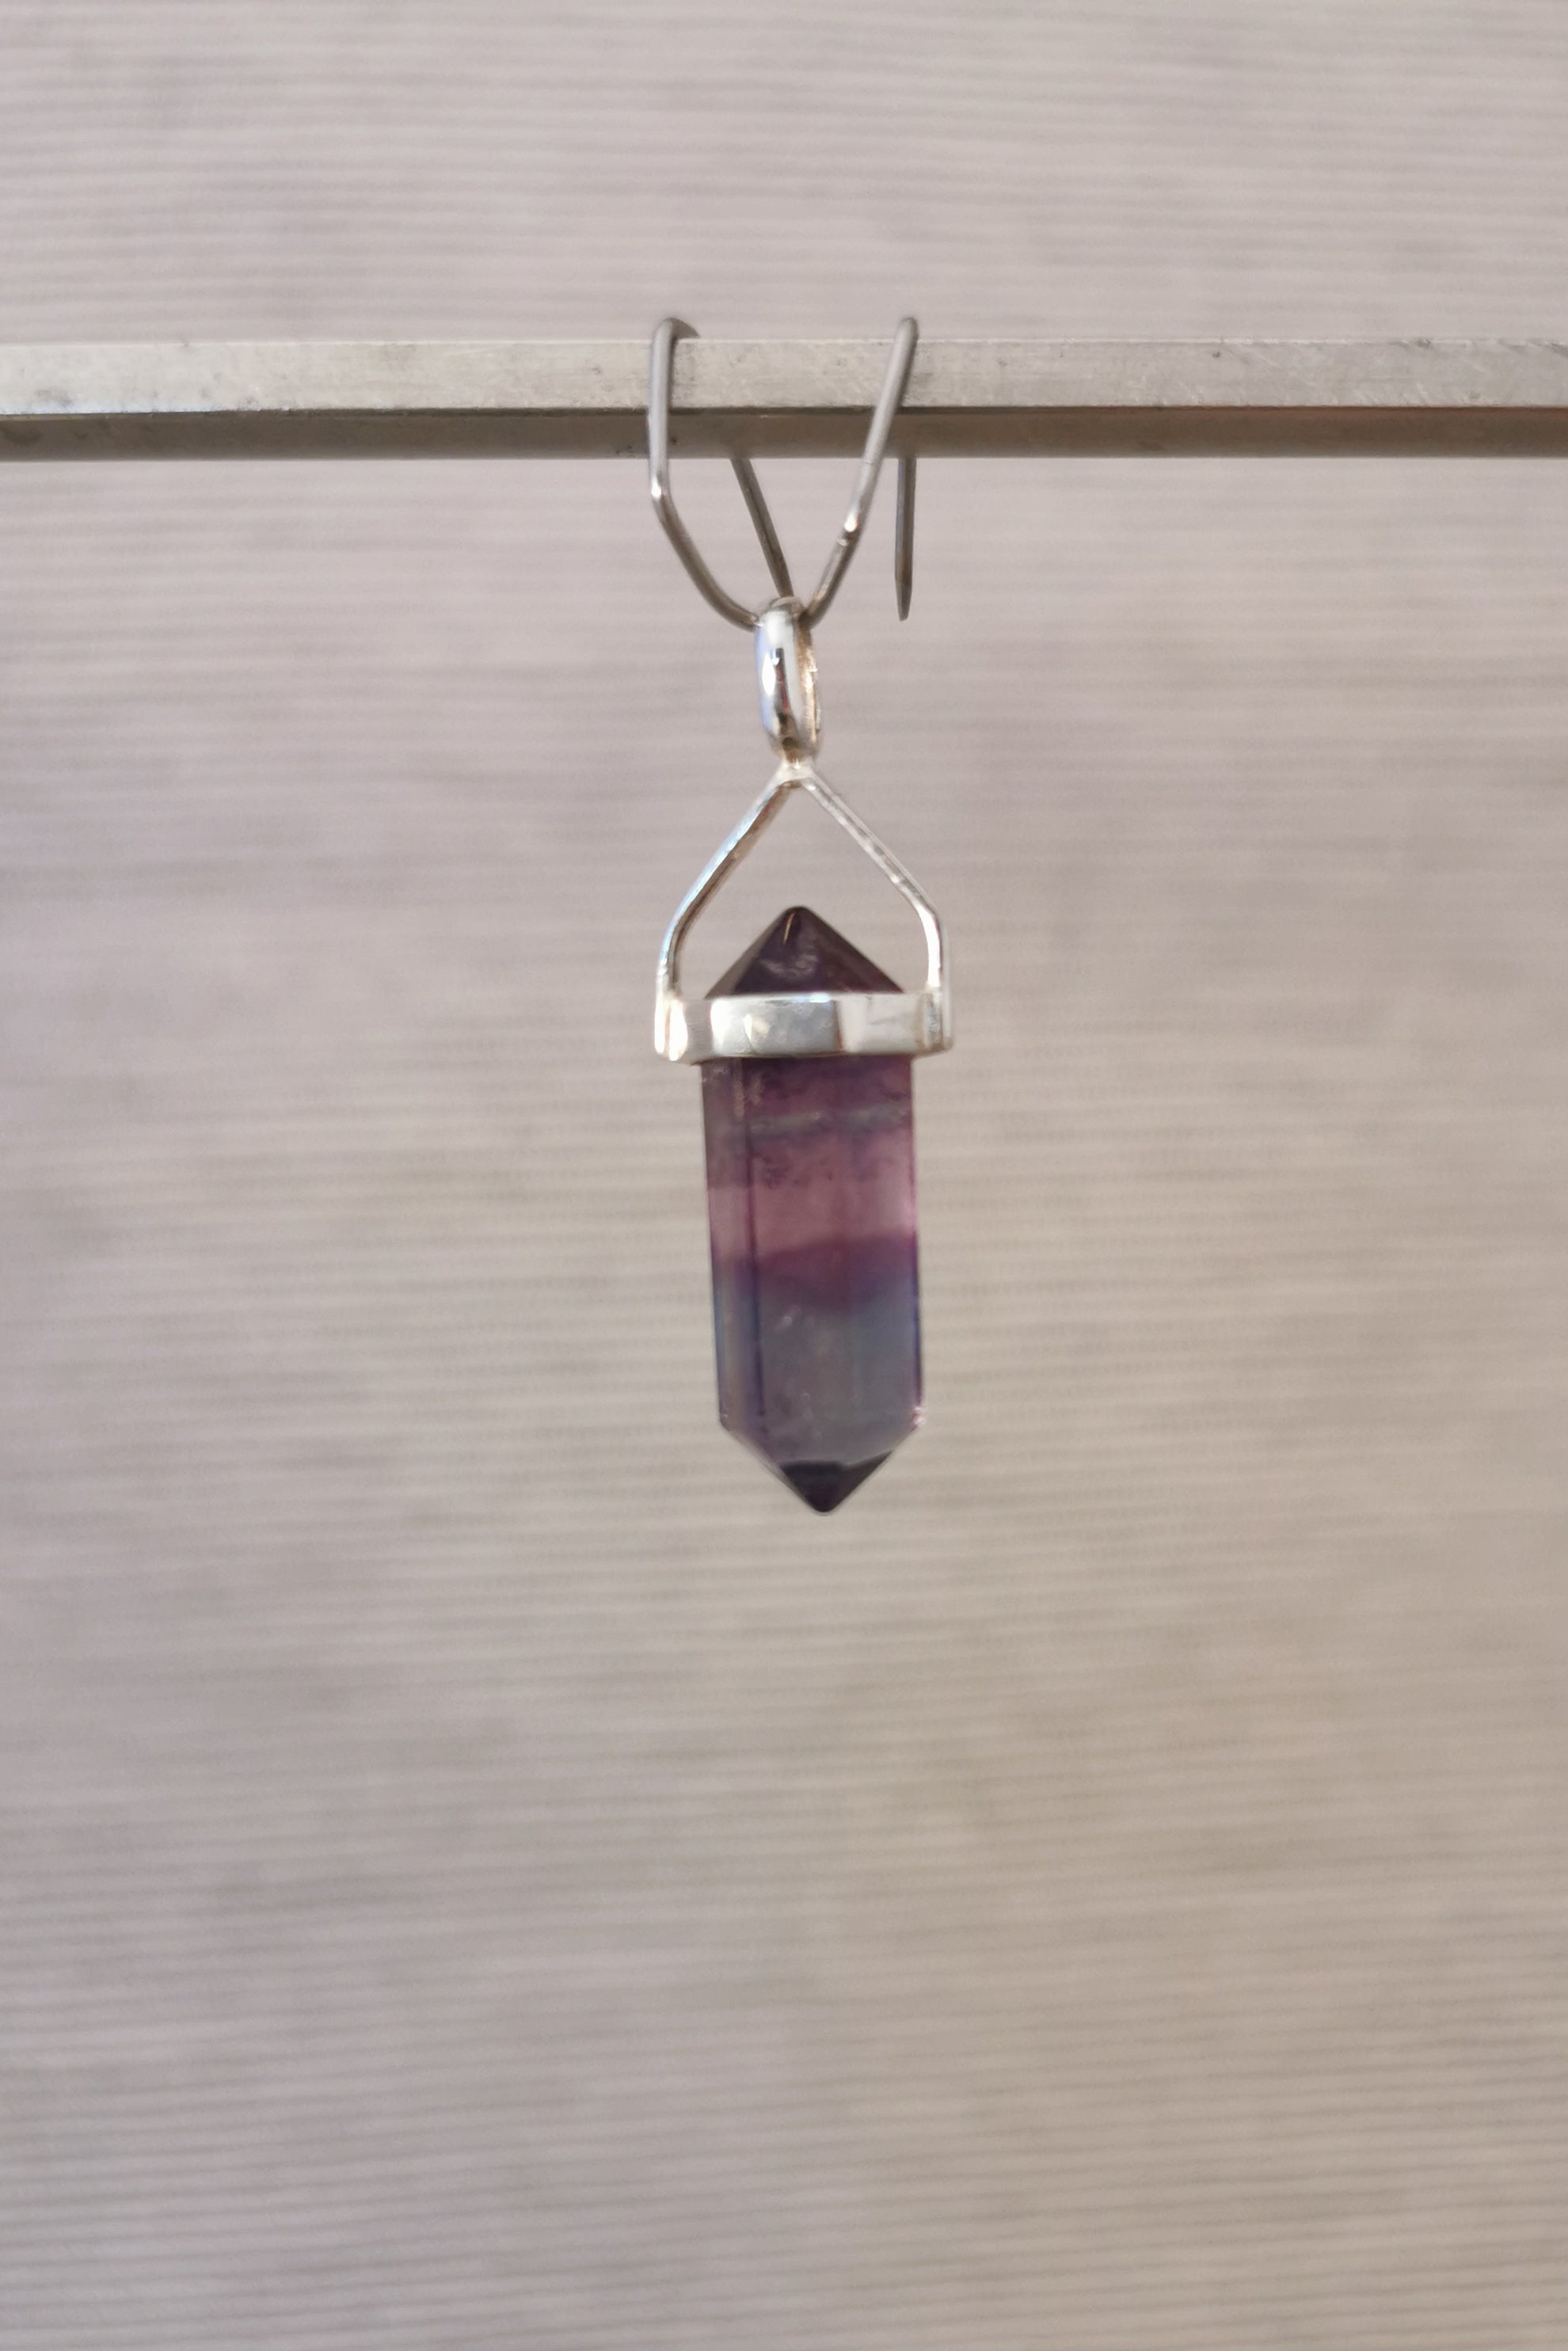 Fluorite Double Terminated Point Pendant - 2cm - 925 Sterling Silver